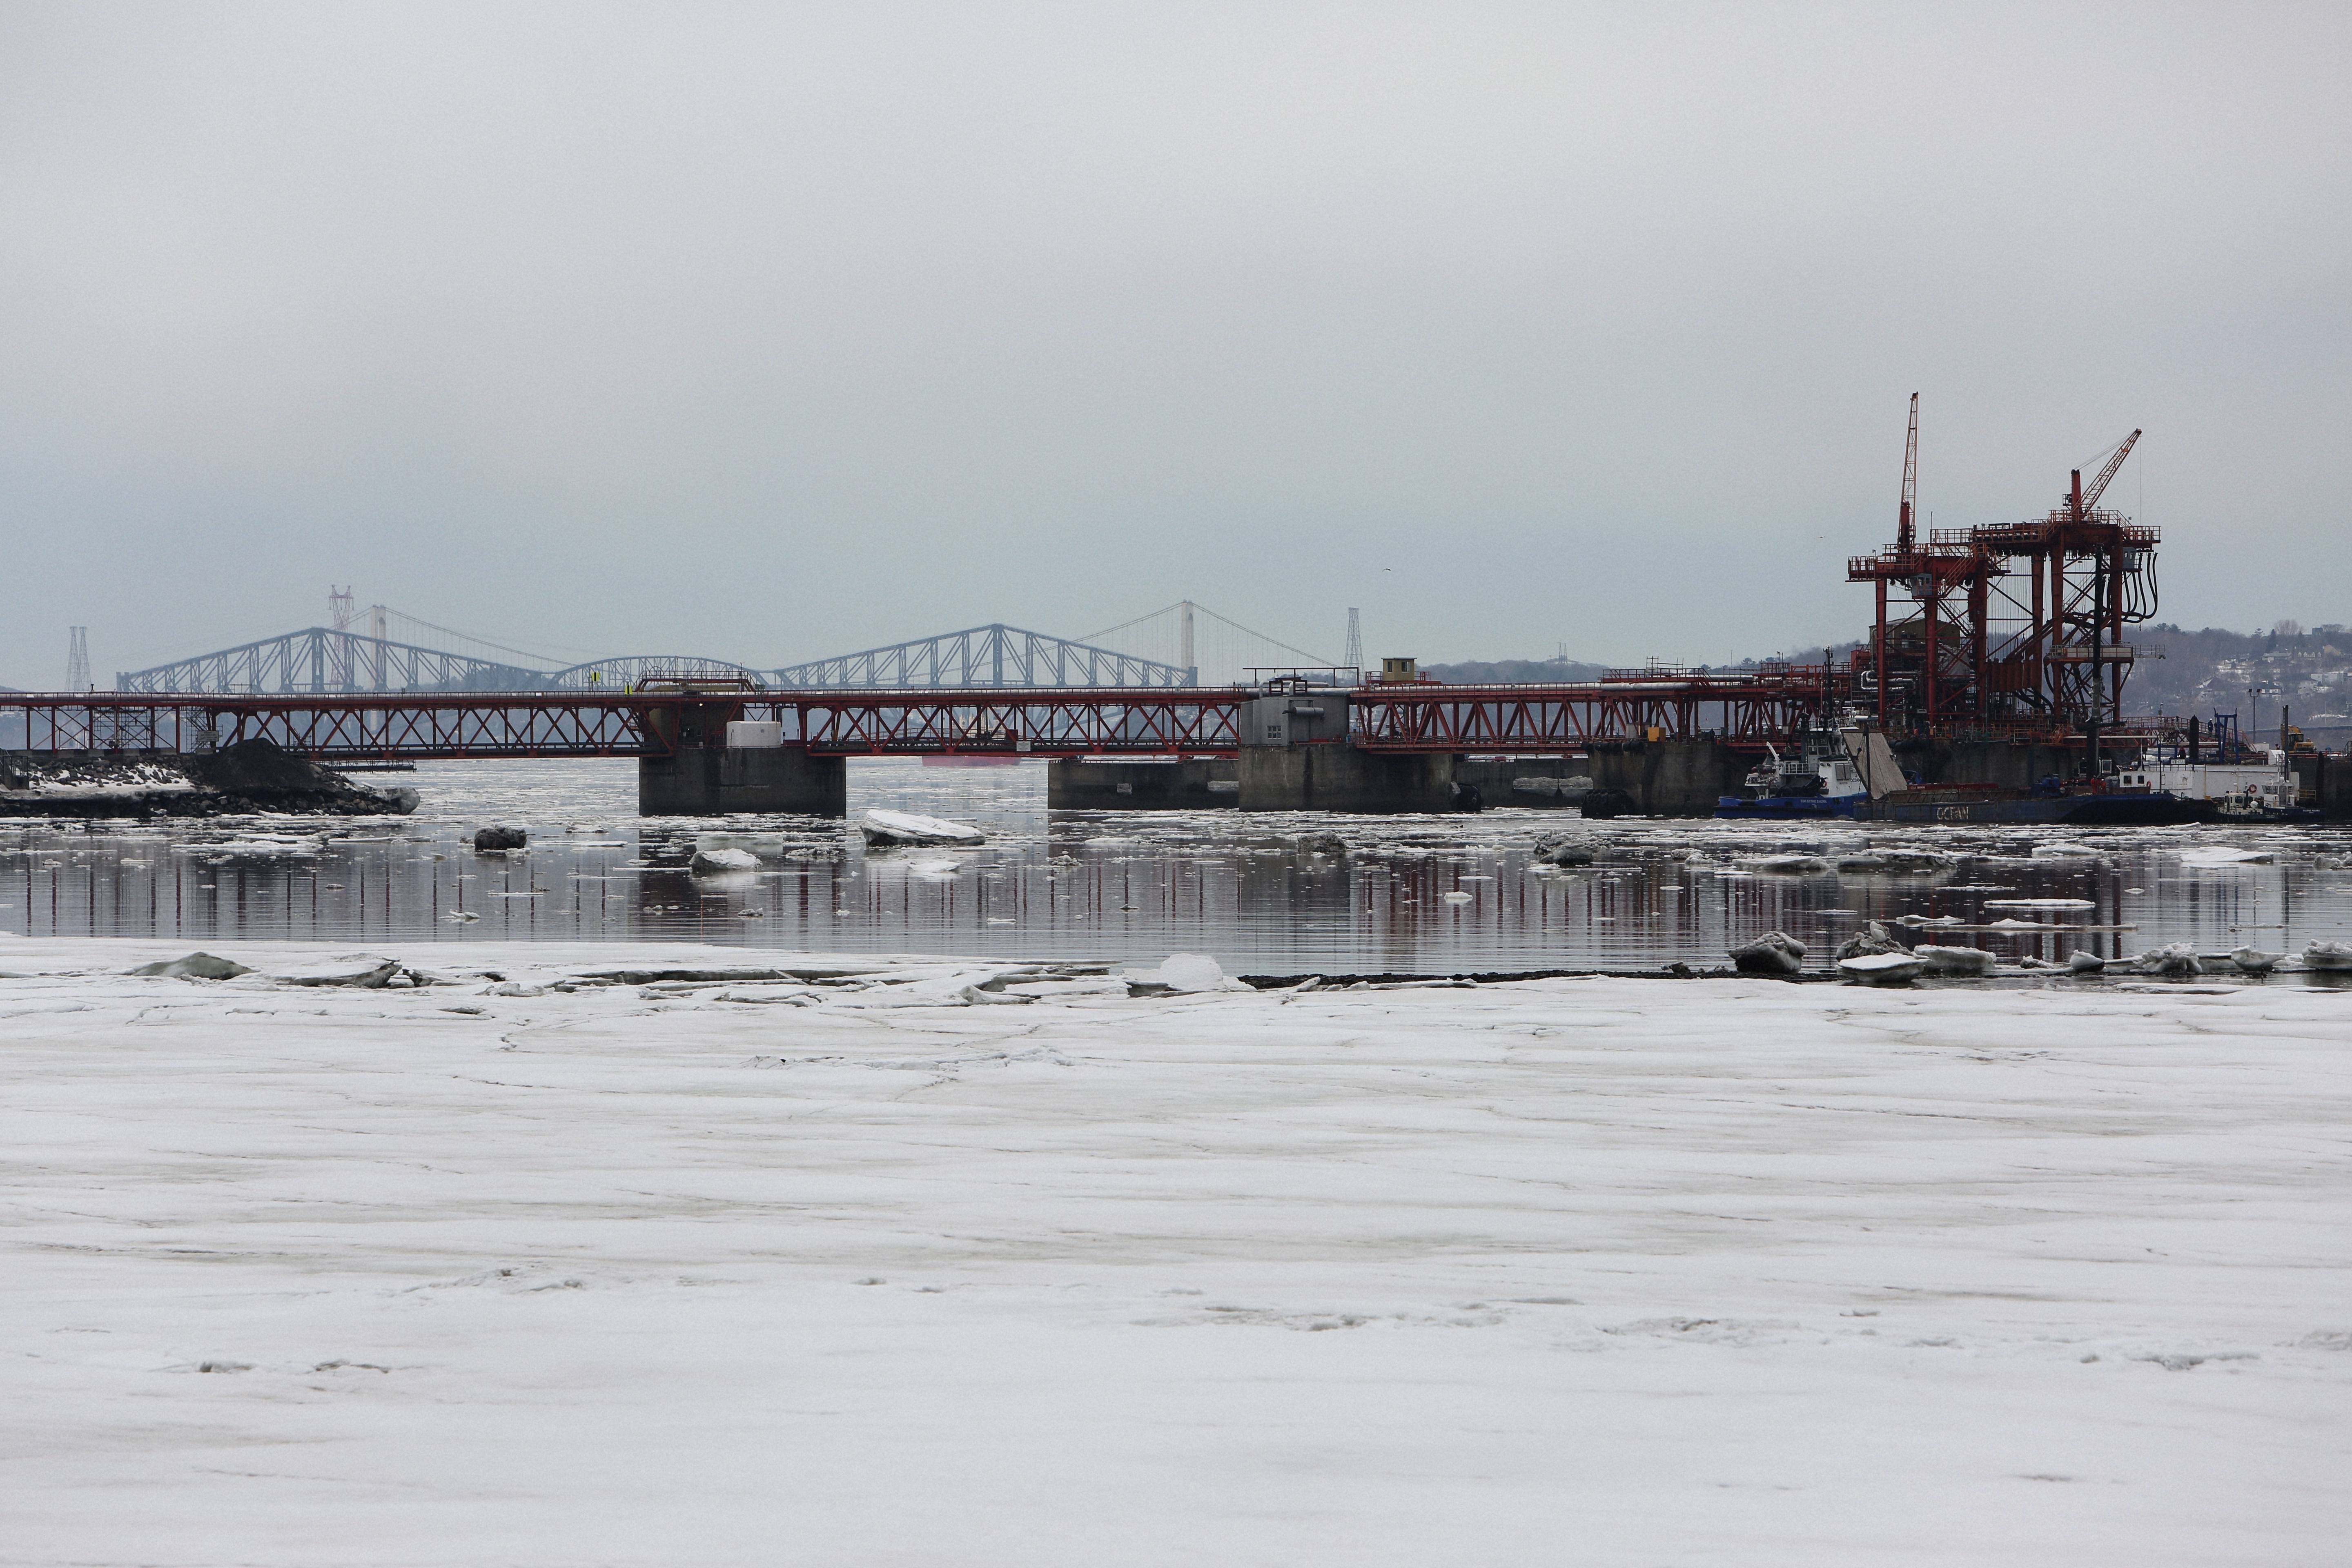 architectural shot of bridge on snowy body of water